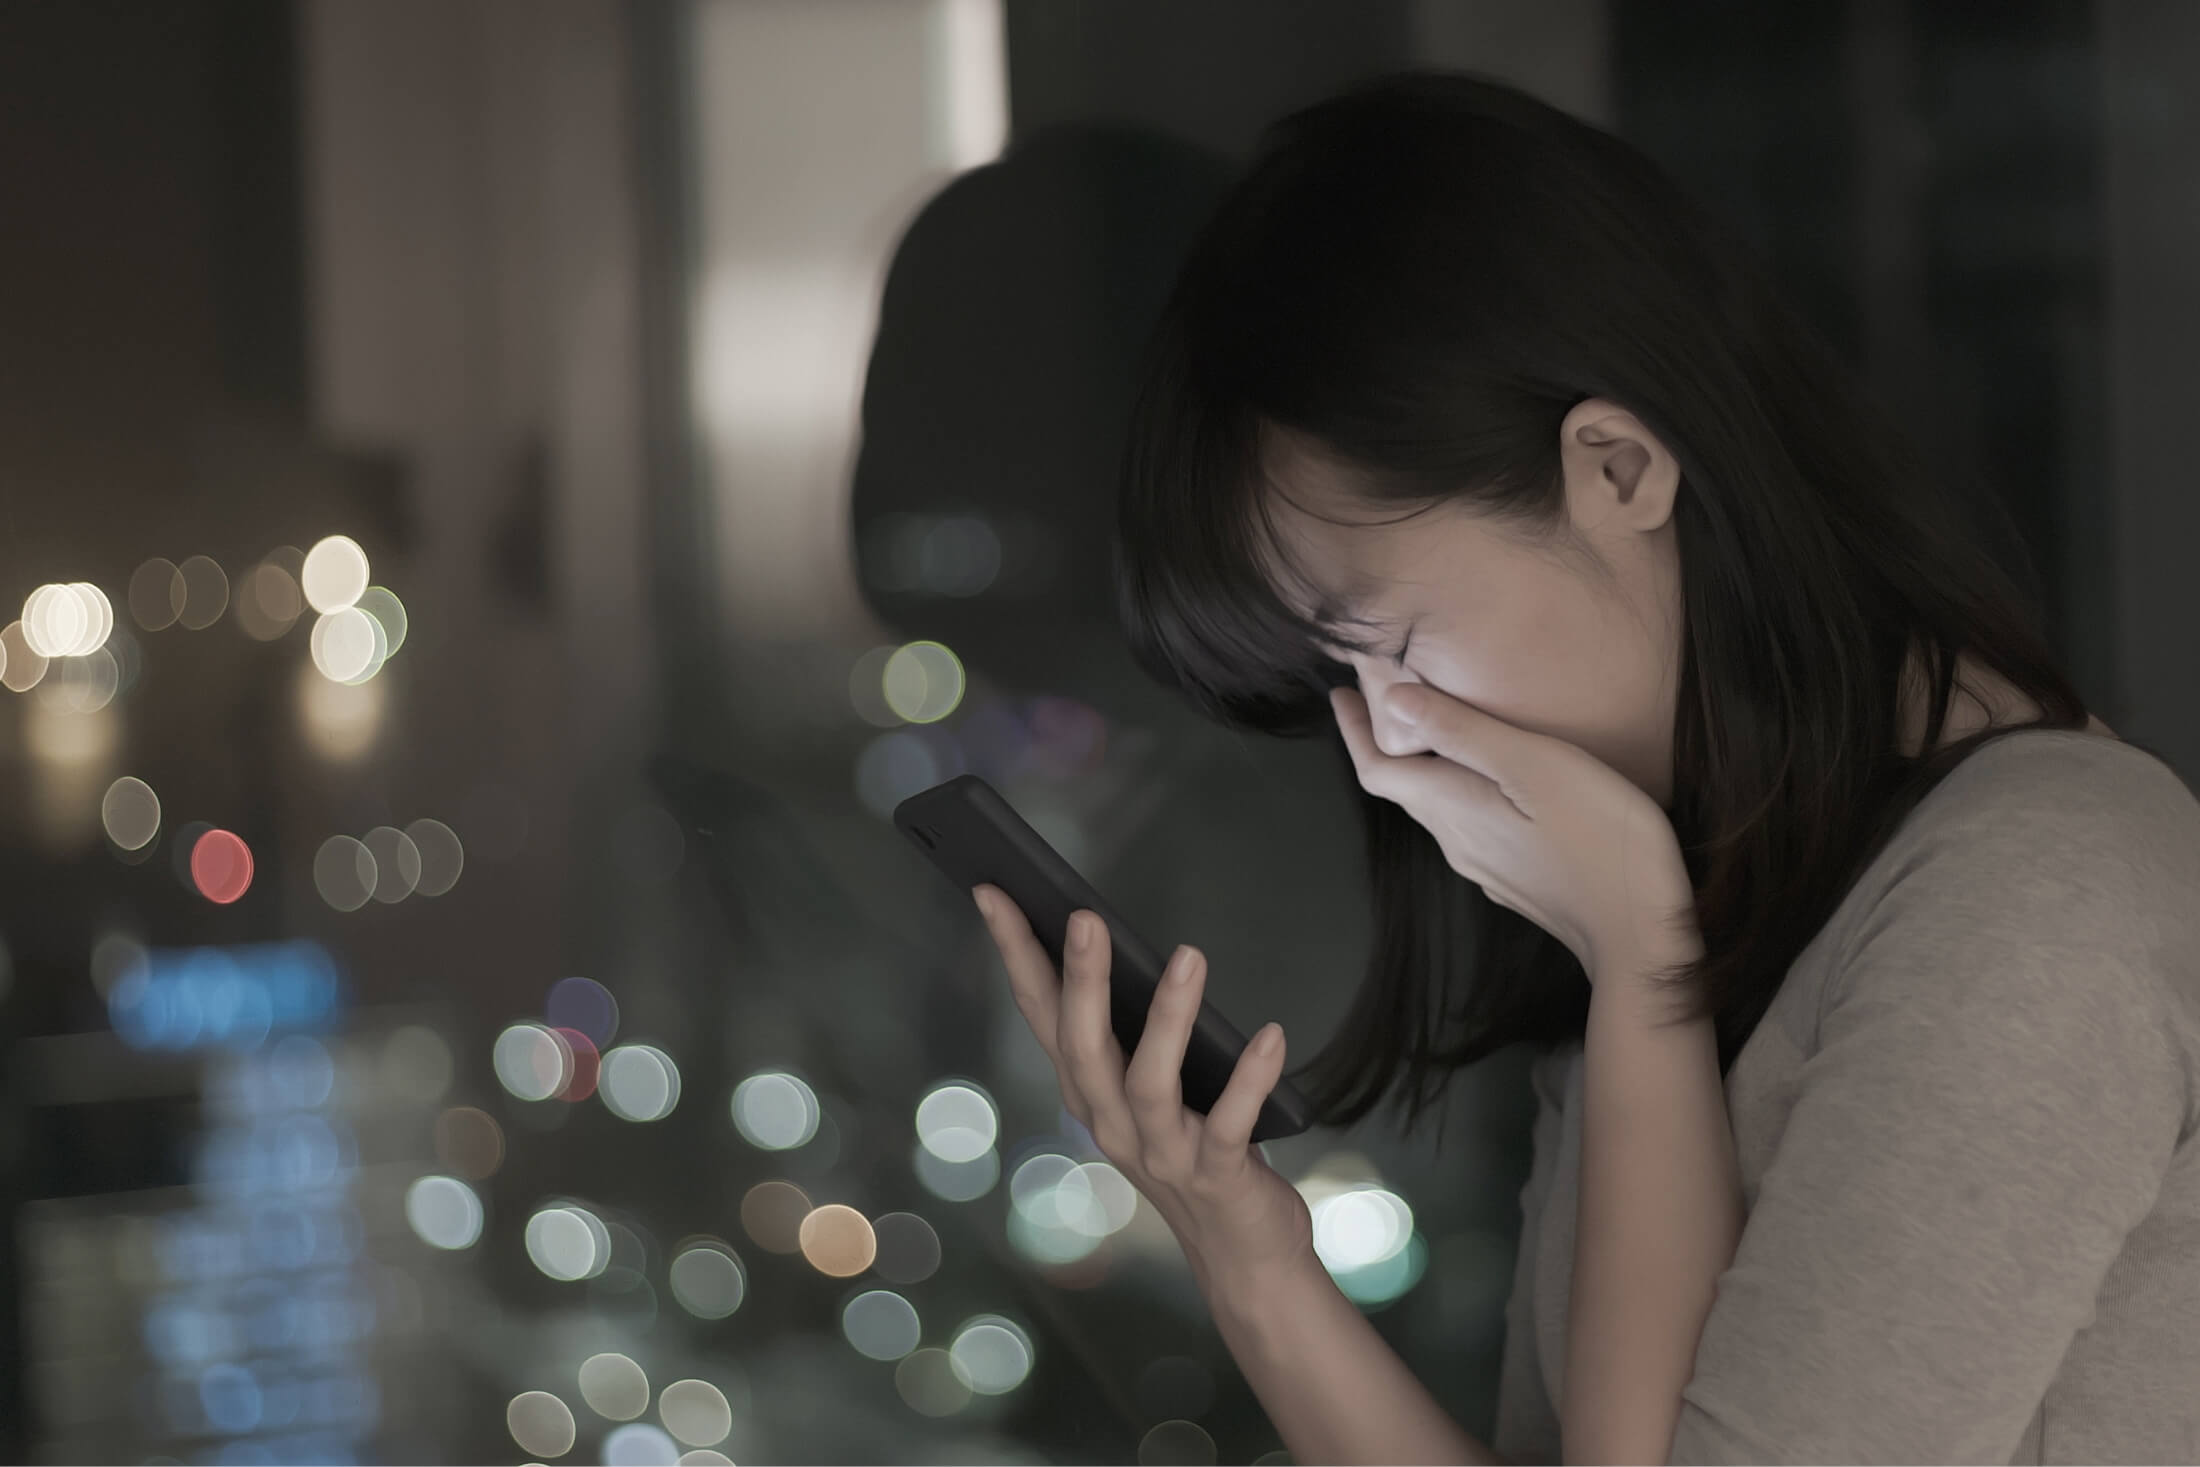 Distressed woman holding cell phone in one hand and with one hand over her mouth